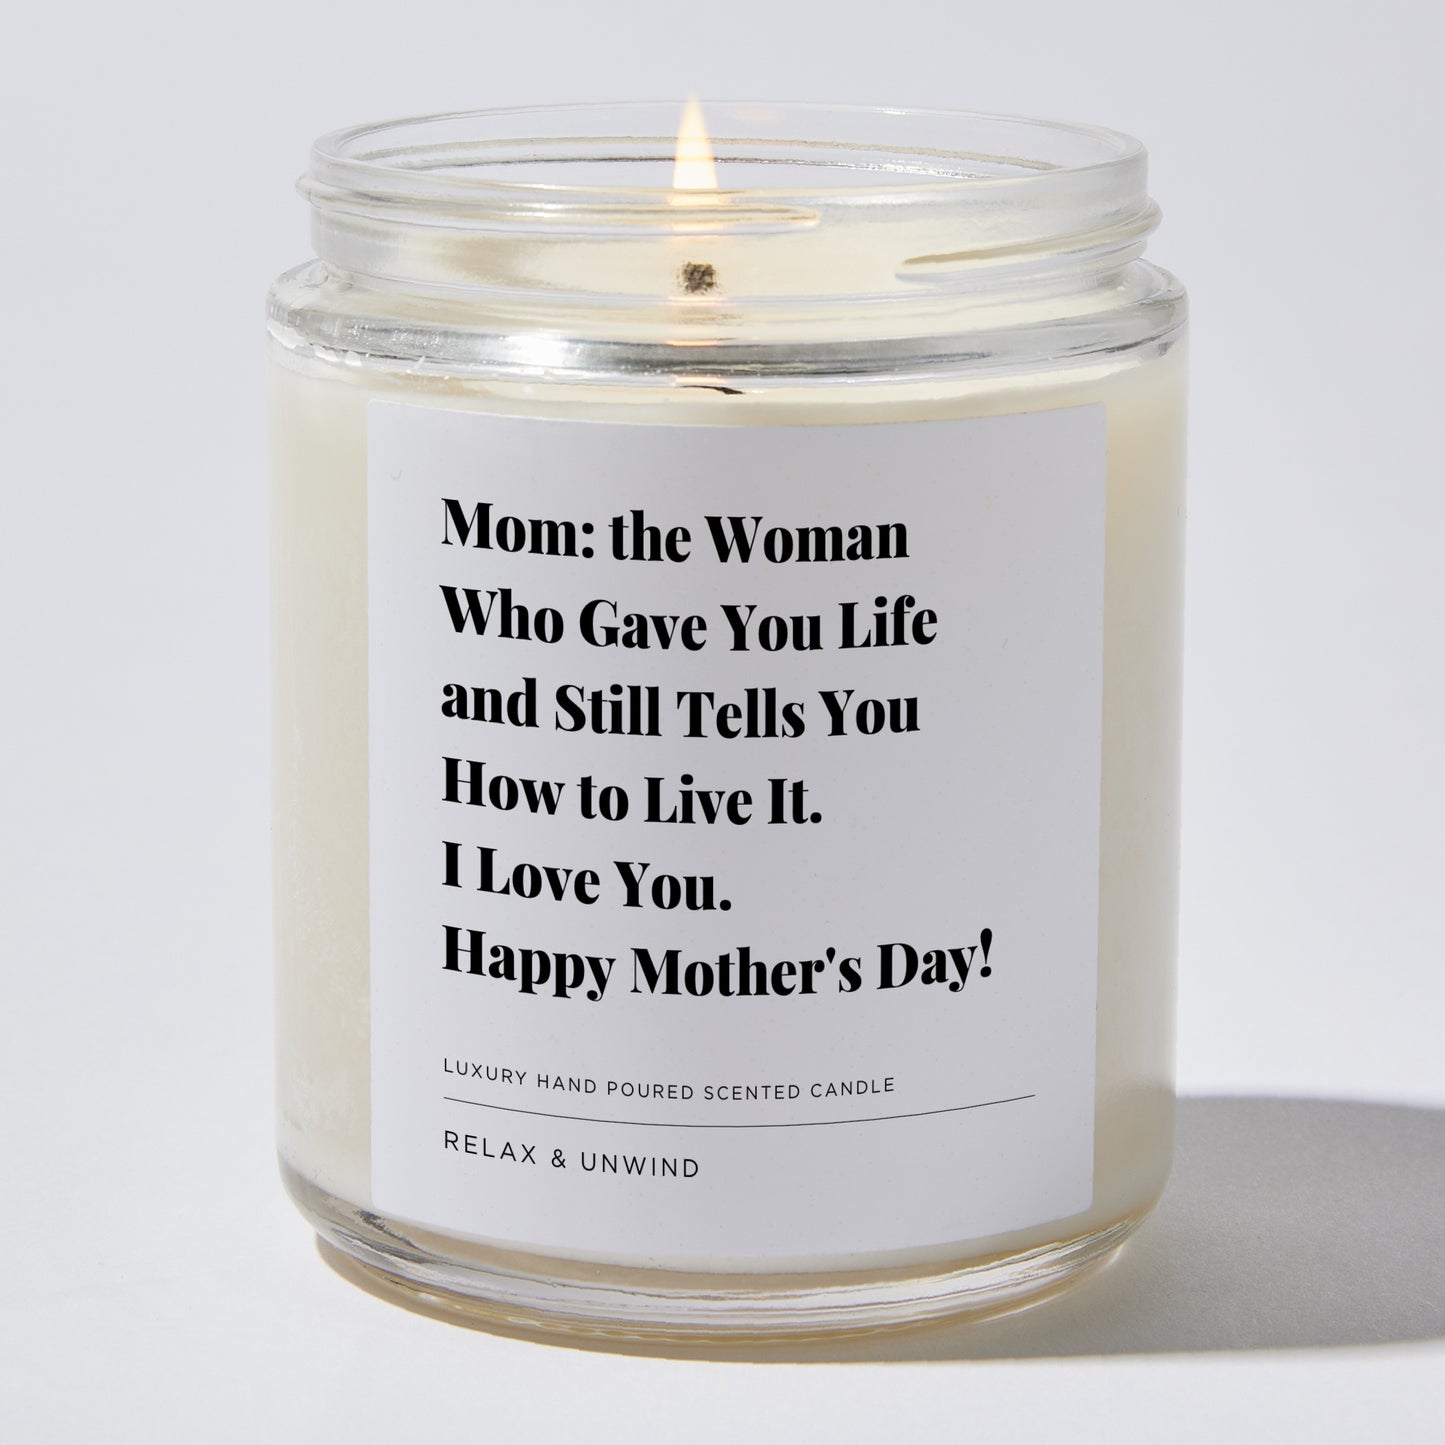 Gift for Mom - Mom: the woman who gave you life and still tells you how to live it. I Love You. Happy Mother's Day! - Candle